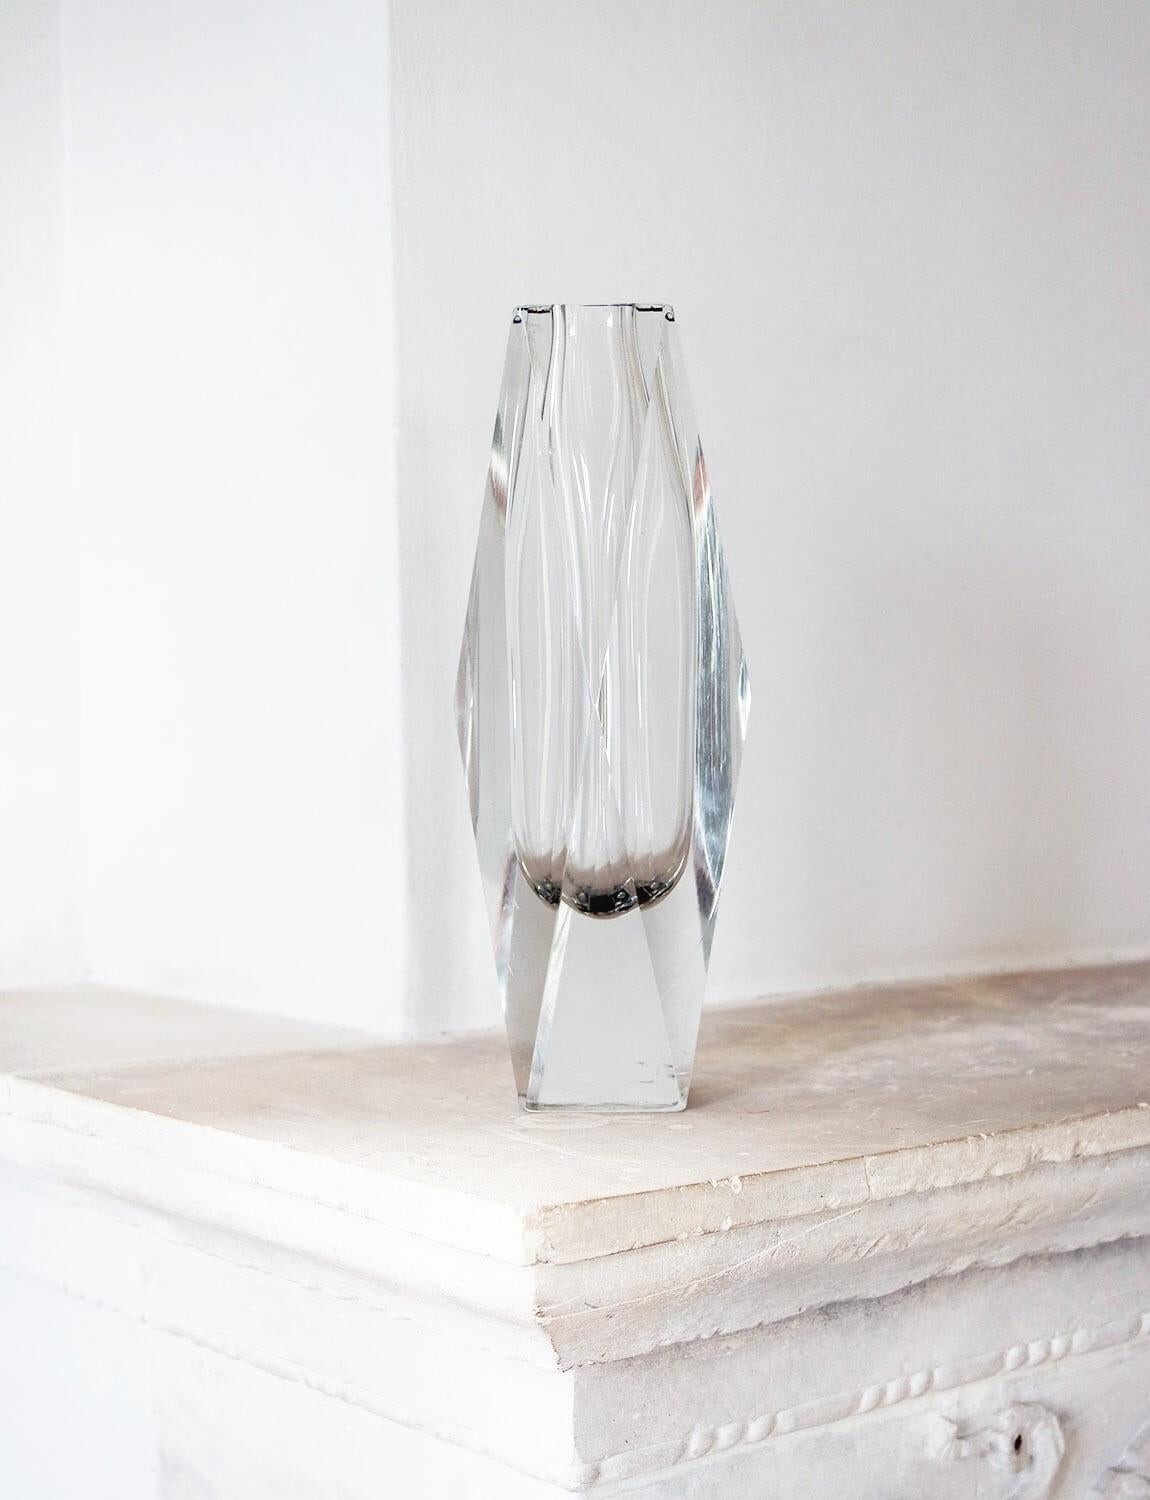 A large 1960s Alessandro Mandruzzato Murano Glass Vase . This excellent example of faceted Alessandro Mandruzzato glass vase is simple, elegant and in good condition considering its age. It was found in a private collection of Murano glass vases